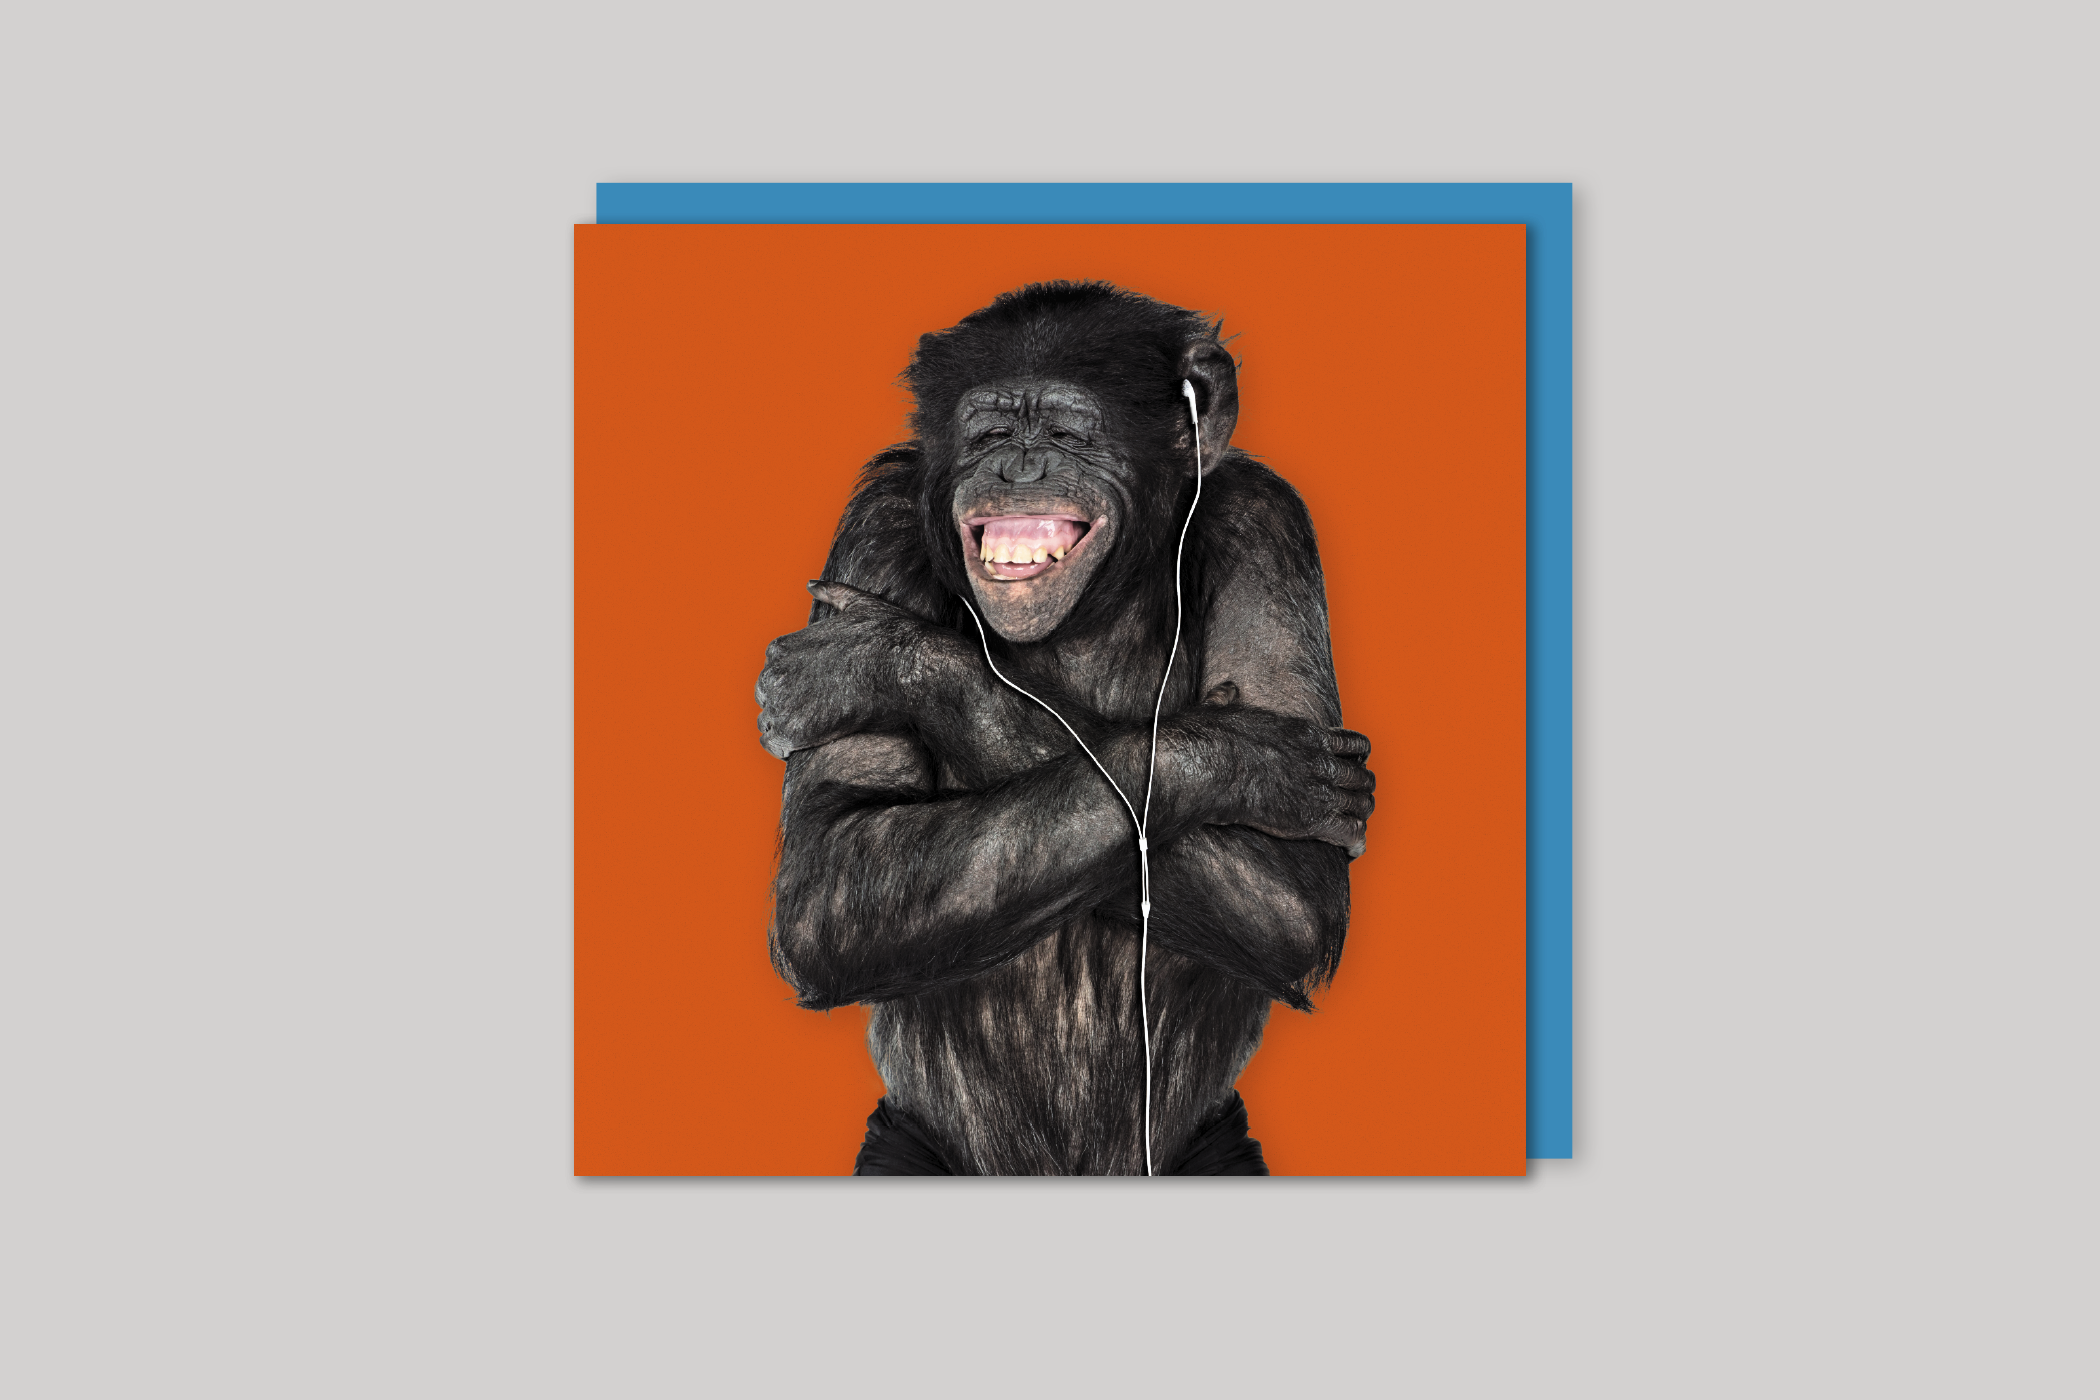 Vincent the Chimpanzee from Wildthings range of greeting cards by Icon, back page.